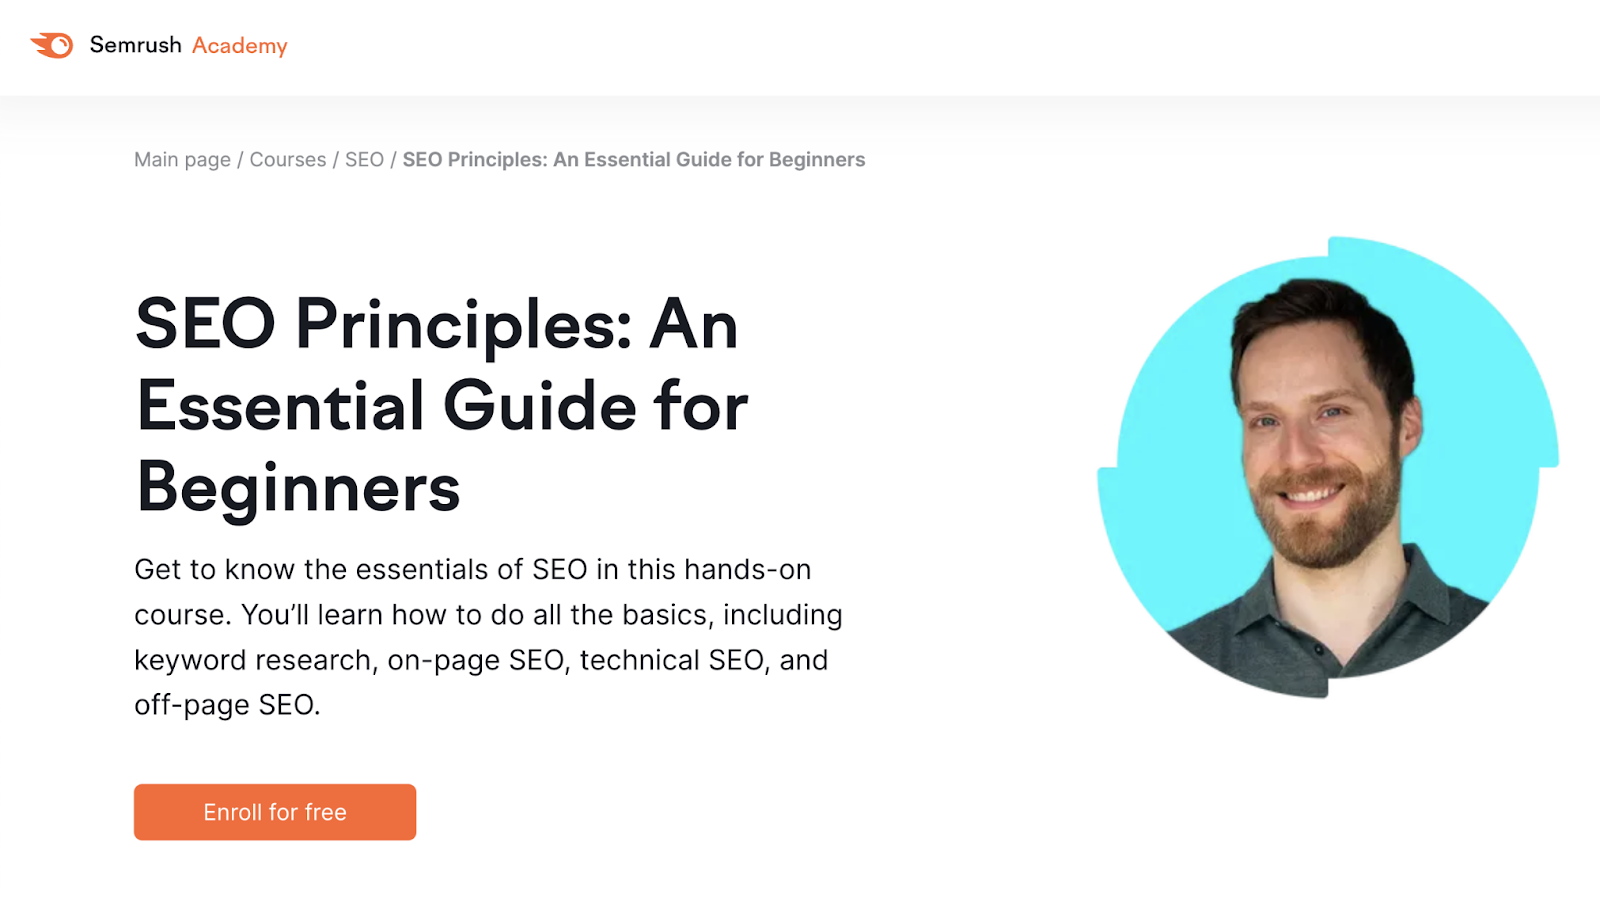 SEO Principles: An Essential Guide for Beginners